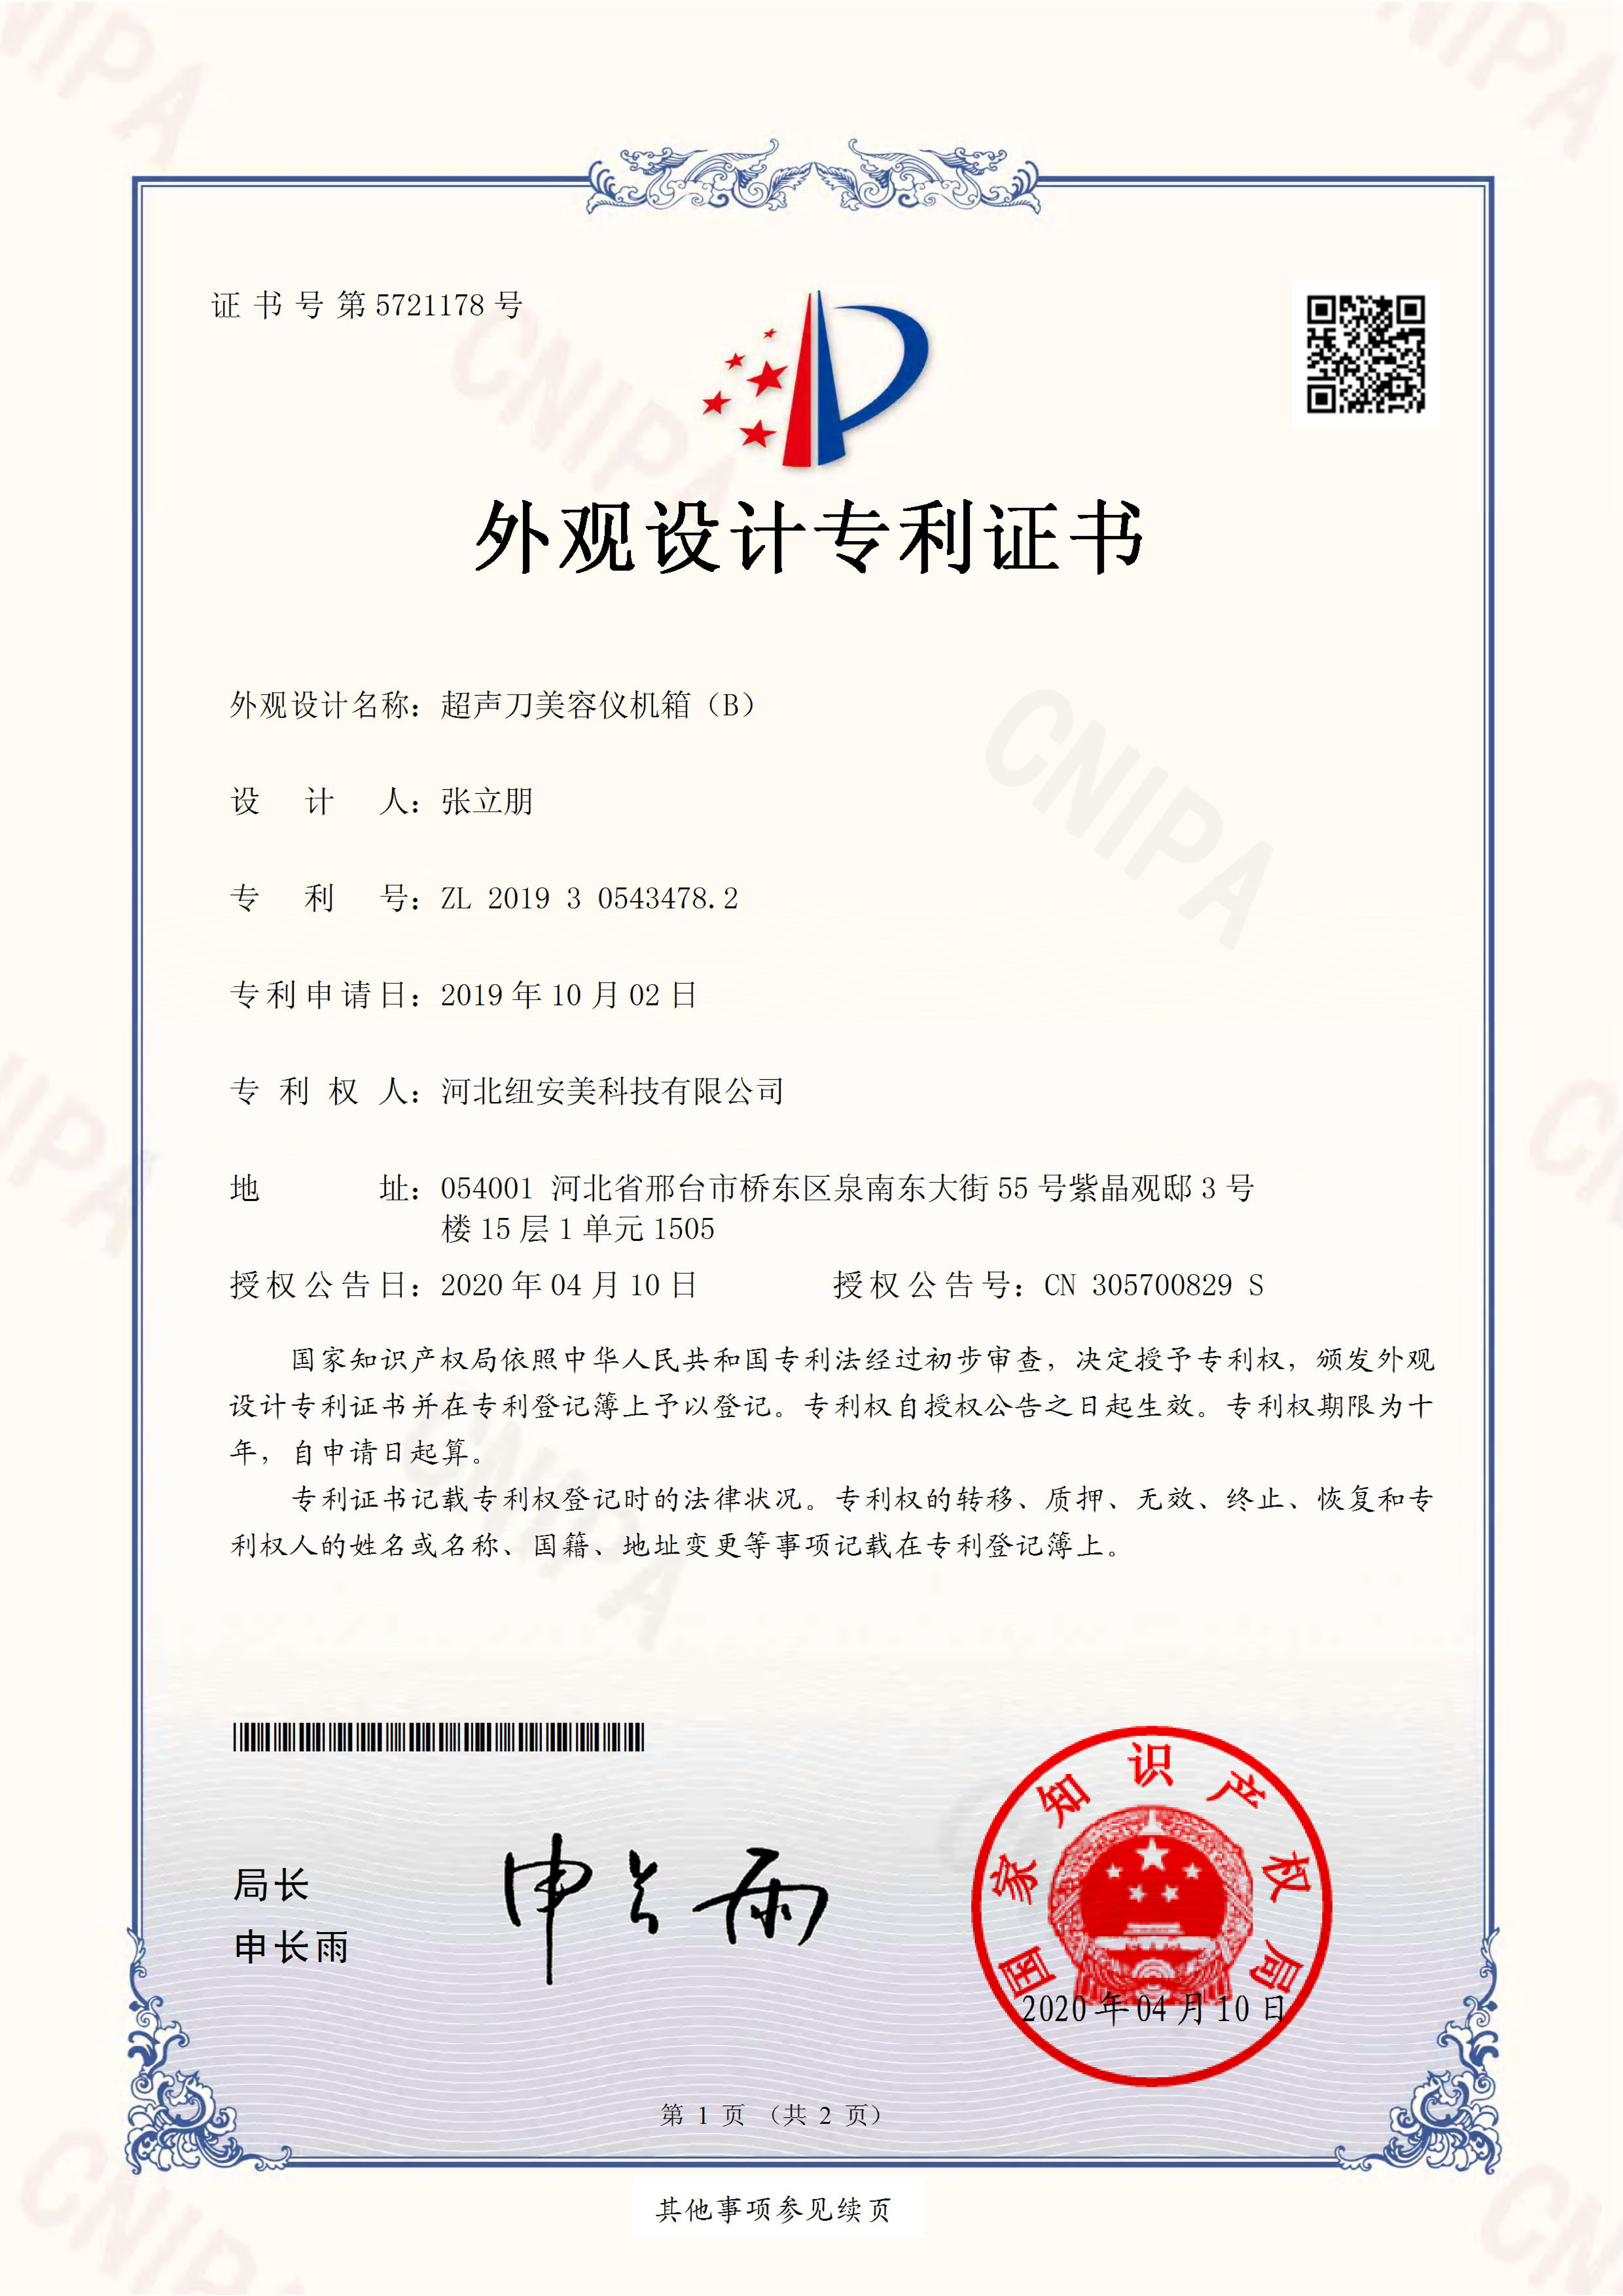 Hair removal machine certificate